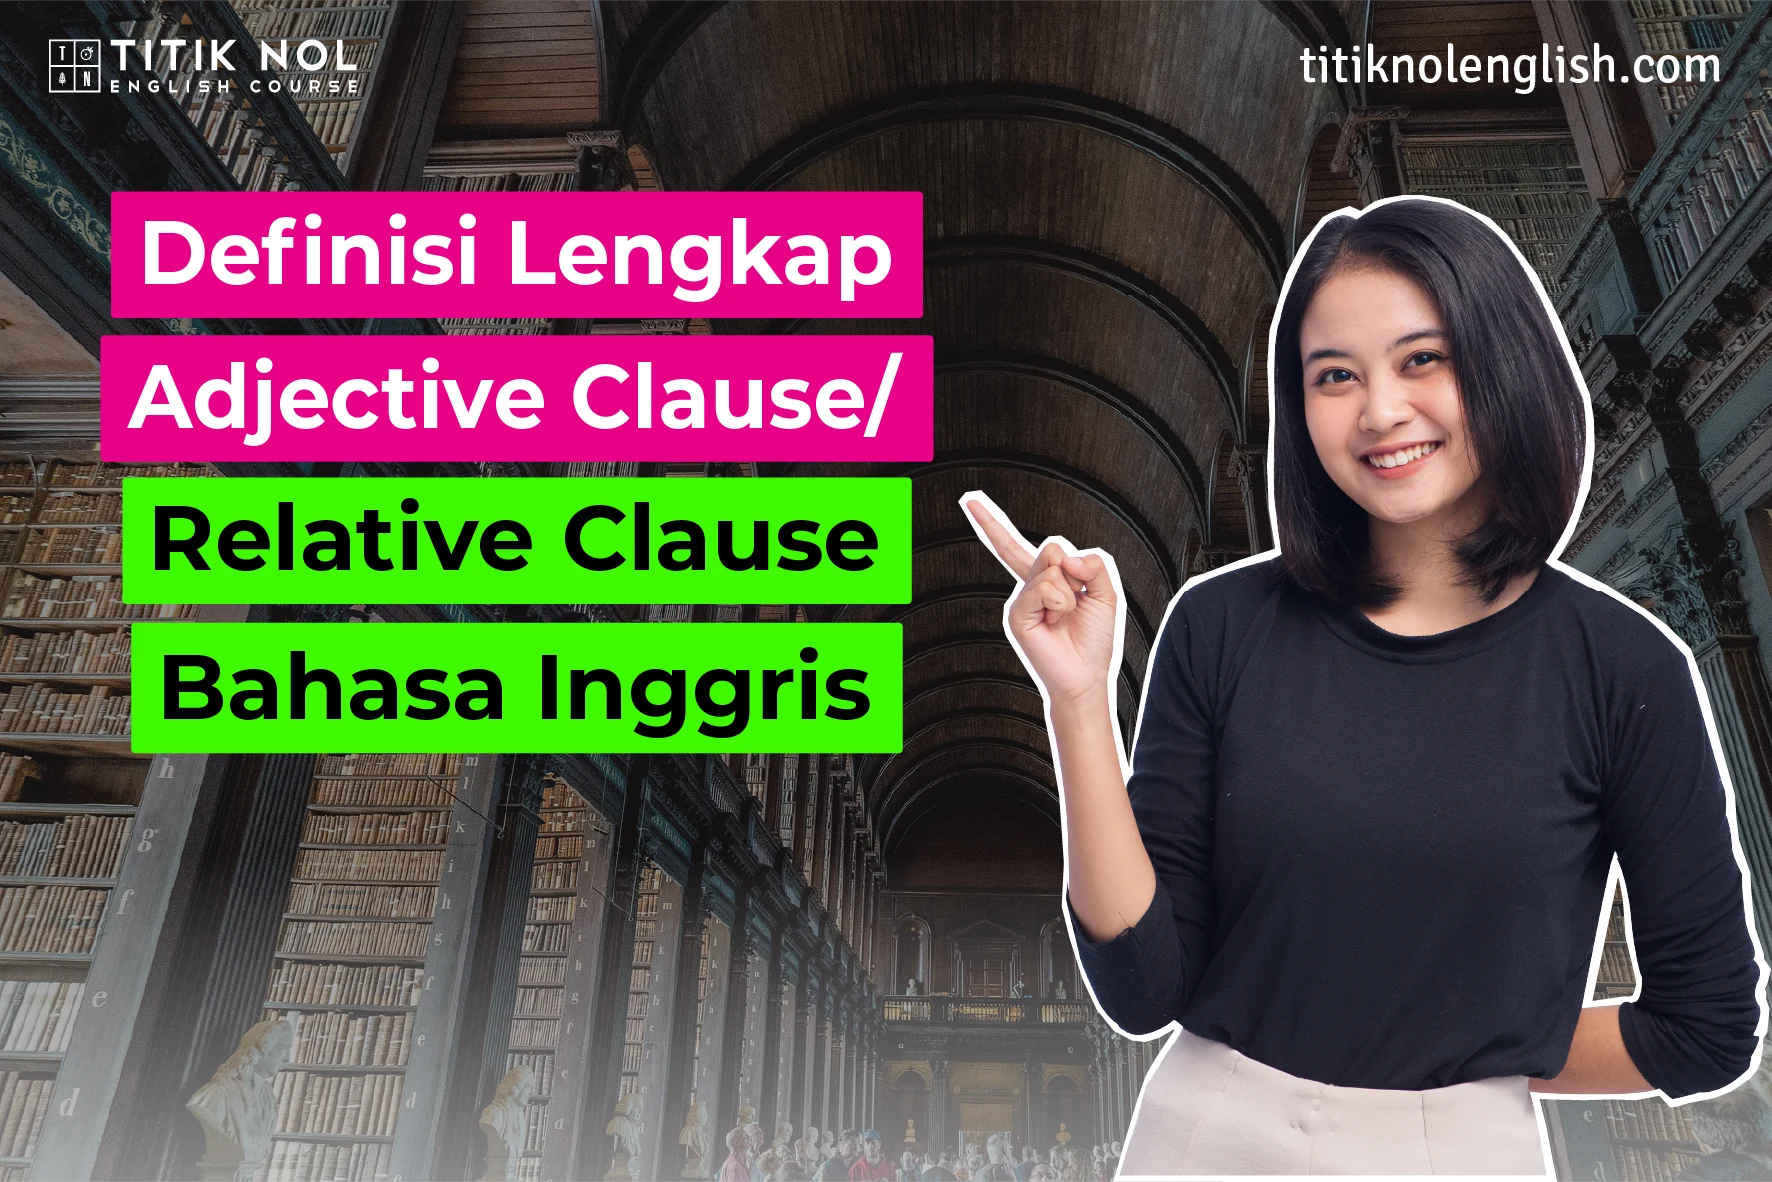 Definisi Lengkap Adjective Clause/Relative Clause